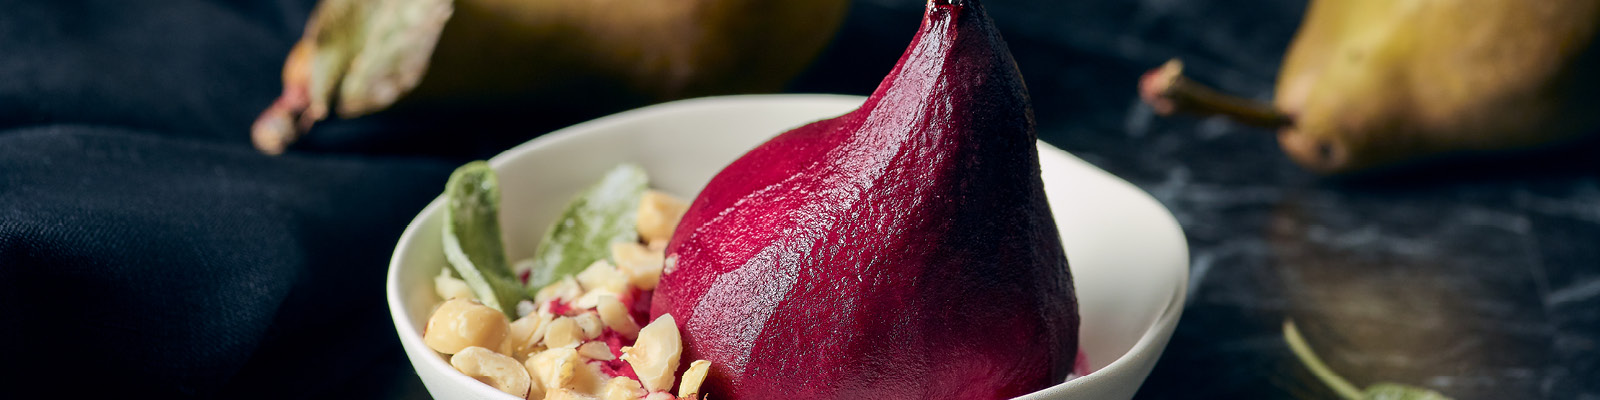 Red Wine Poached Pears with Mascarpone Cream    